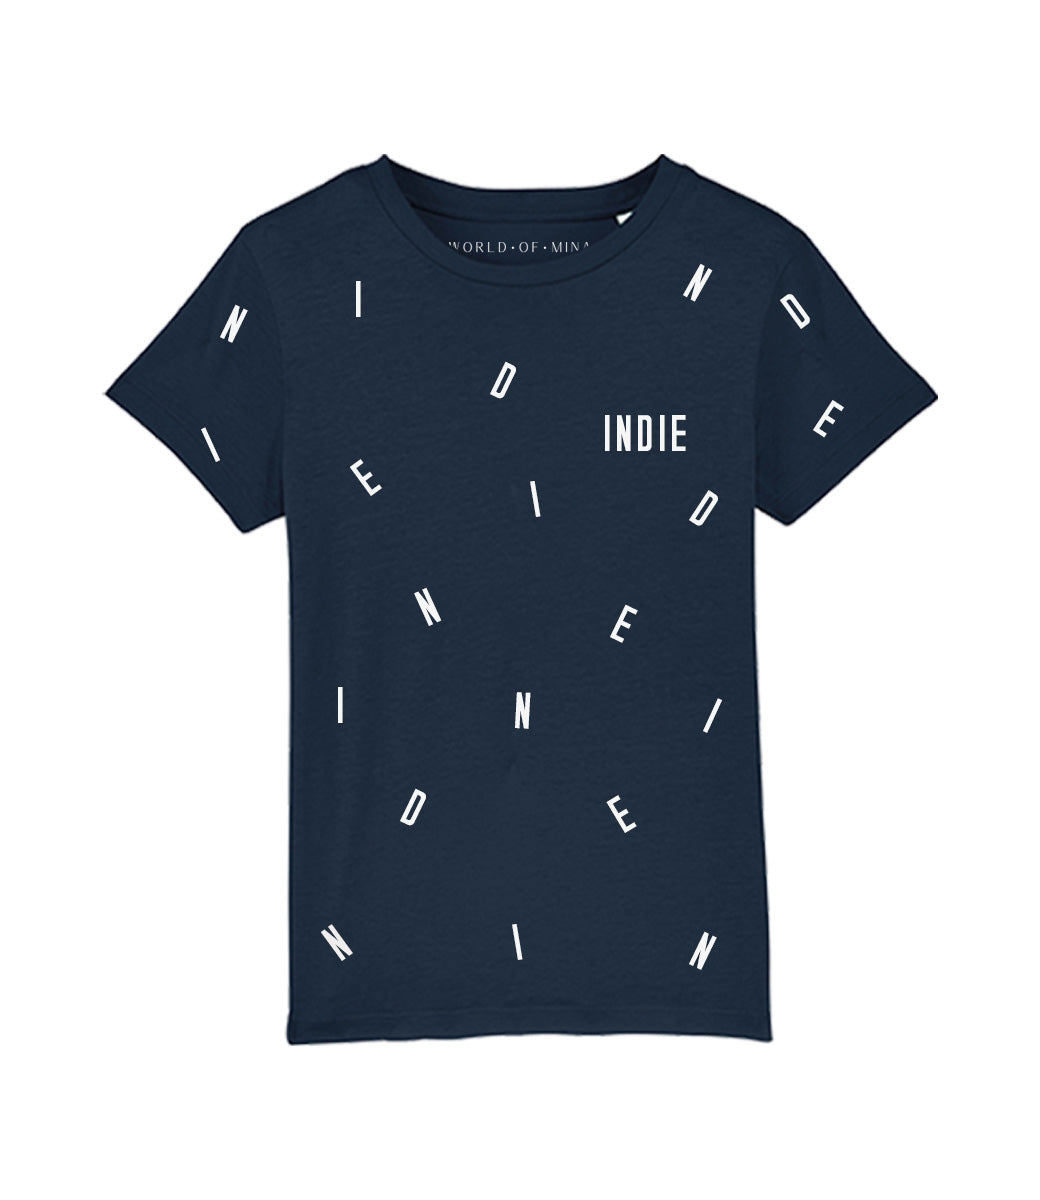 Kids t-shirt / "dancing letters" with name